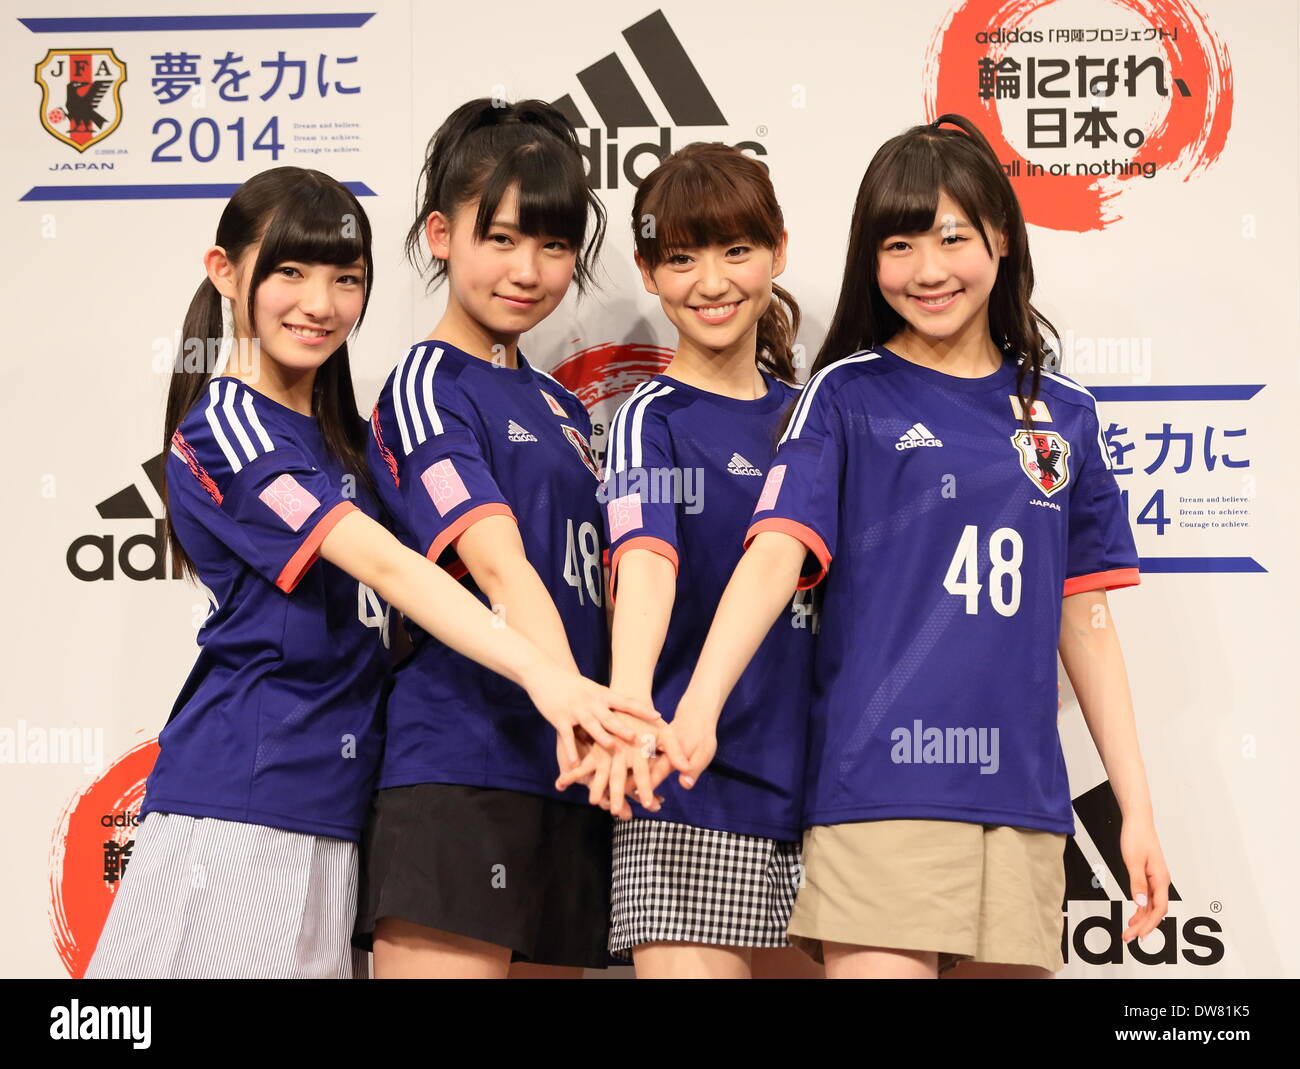 Akb 48 High Resolution Stock Photography And Images Alamy